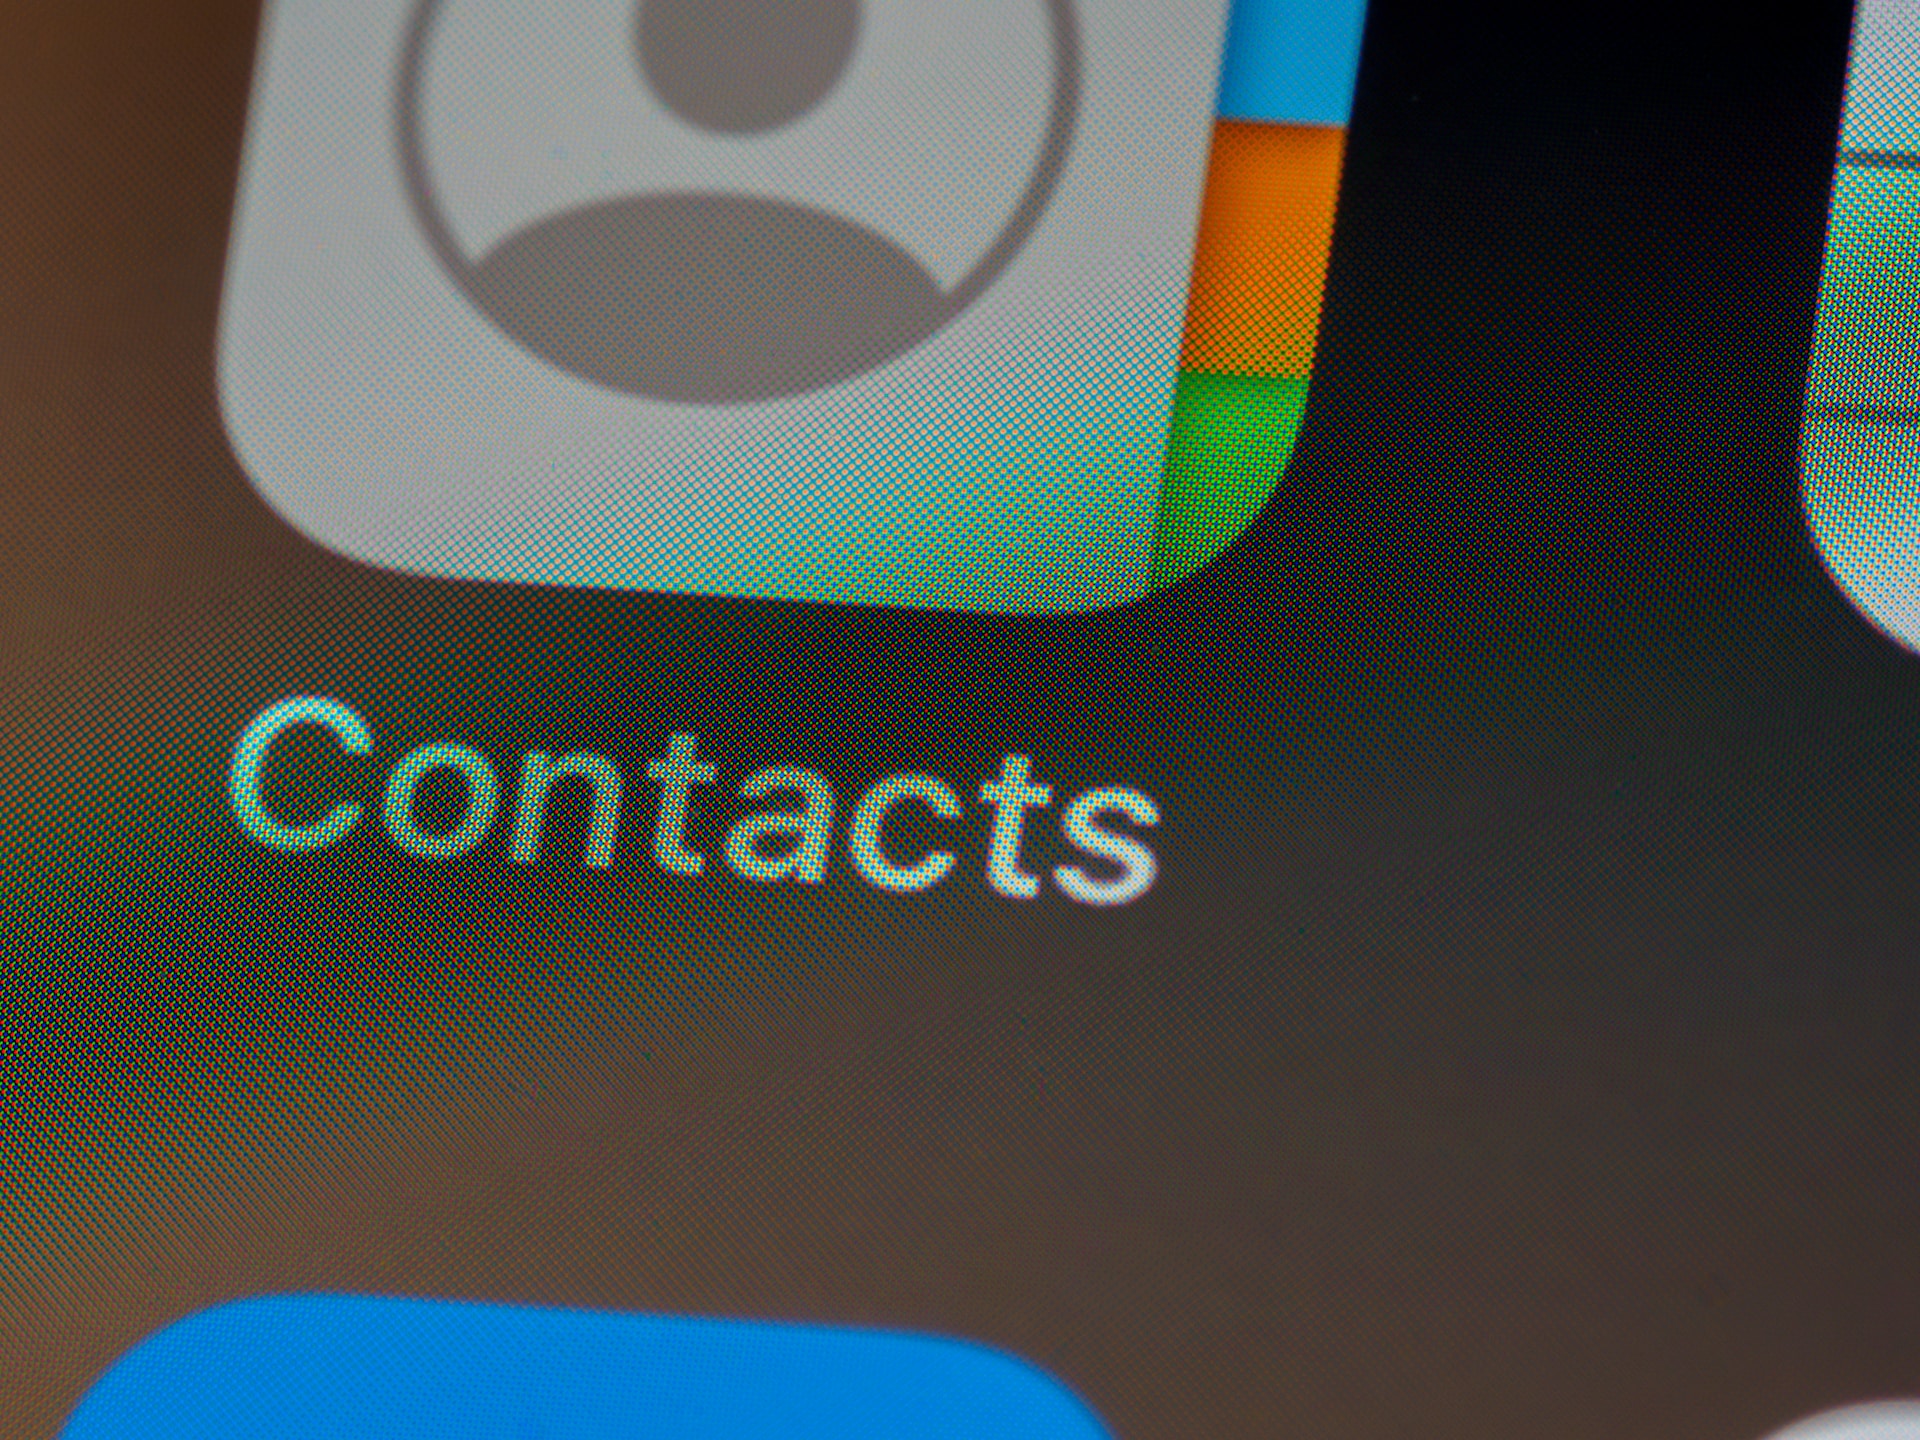 The Contacts icon on a phone's screen